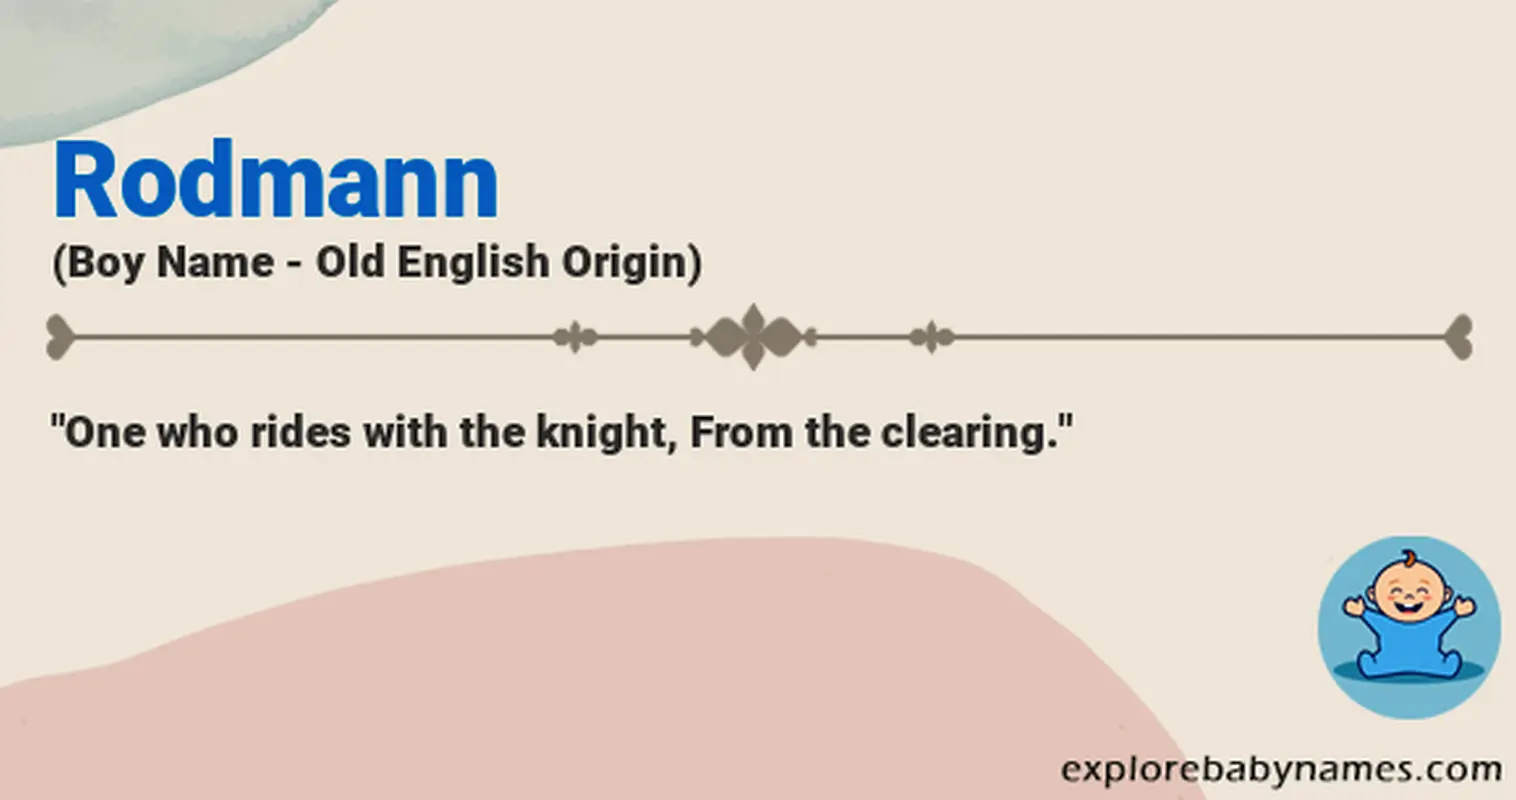 Meaning of Rodmann